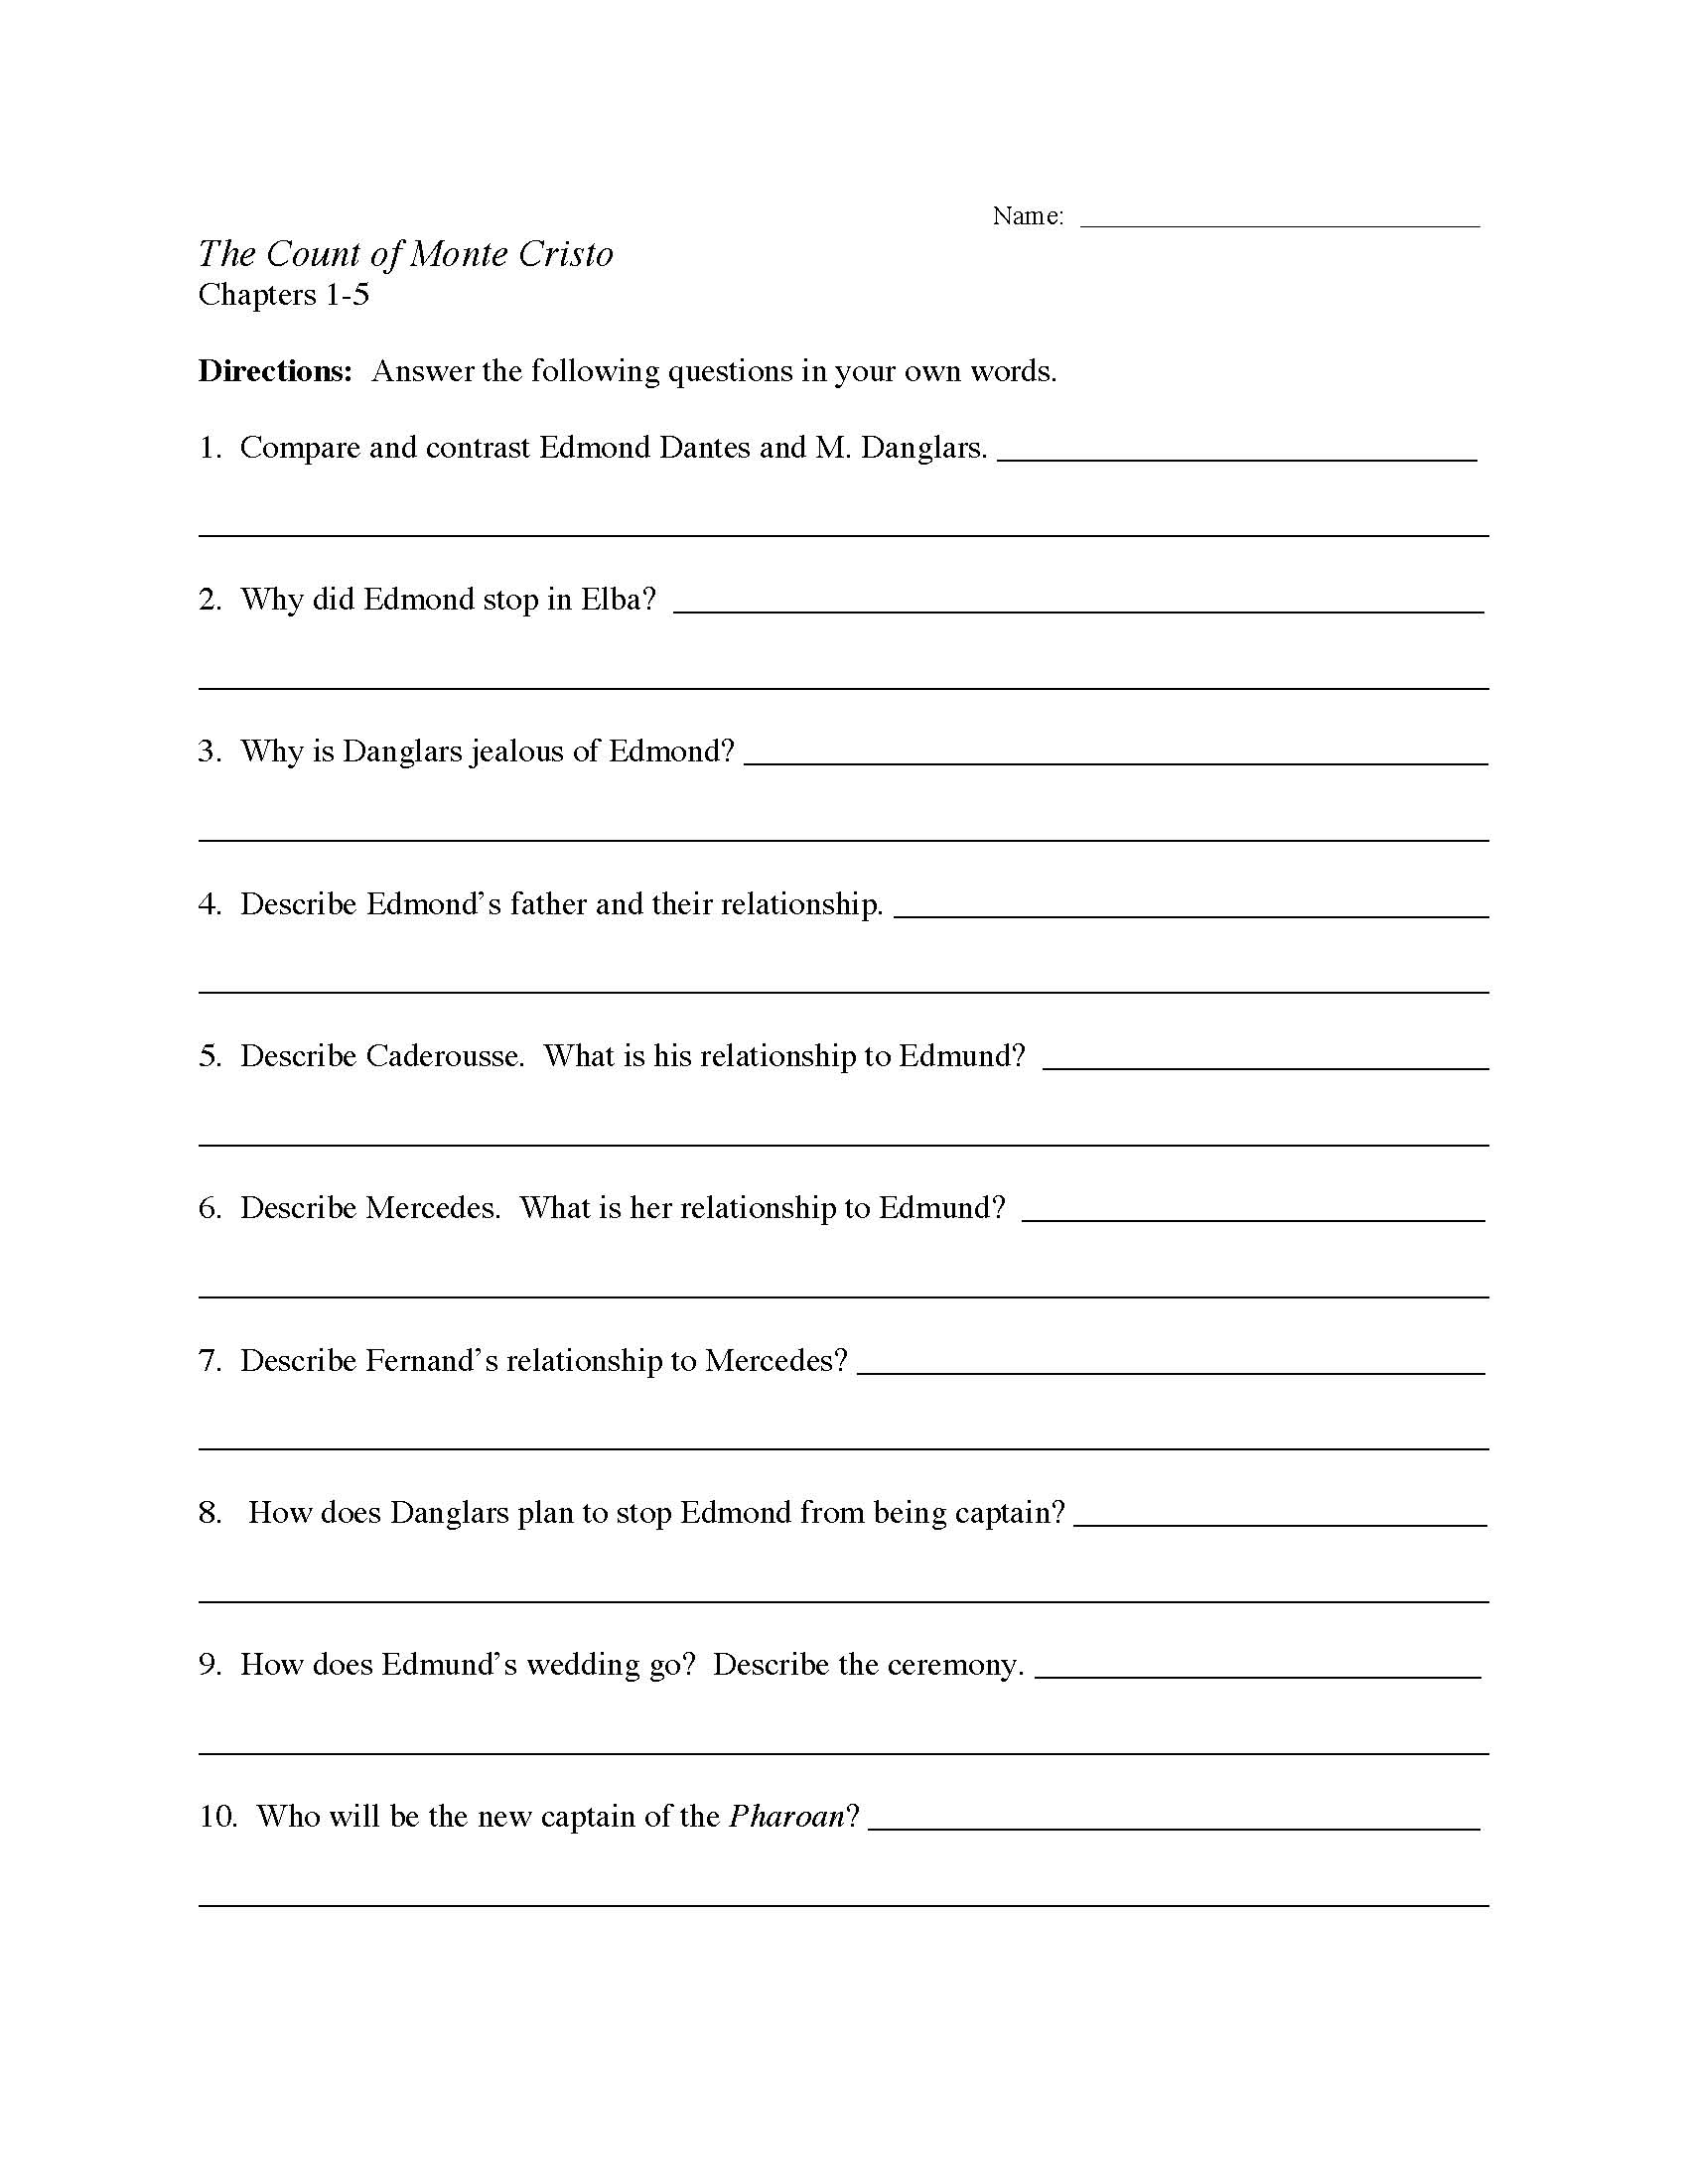 This is a preview image of the The Count of Monte Cristo Chapters 1-5 Worksheet.